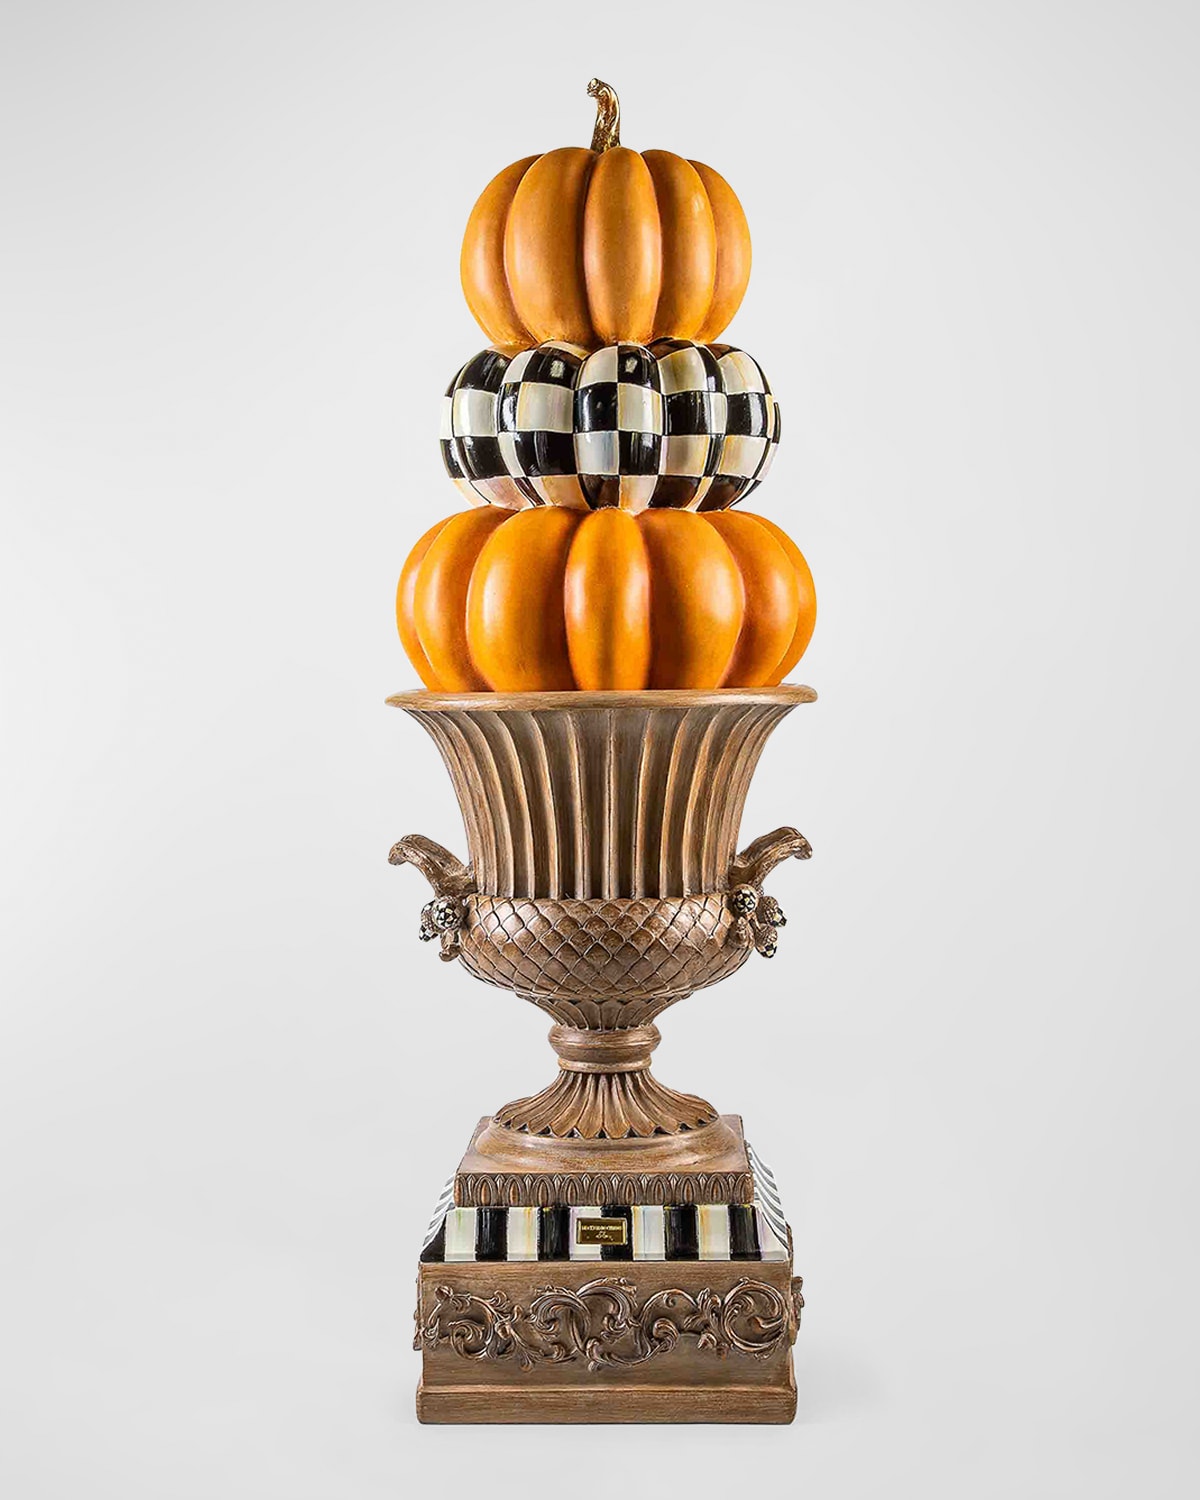 Mackenzie-childs Fall On The Farm Stacked Pumpkin Trophy Urn